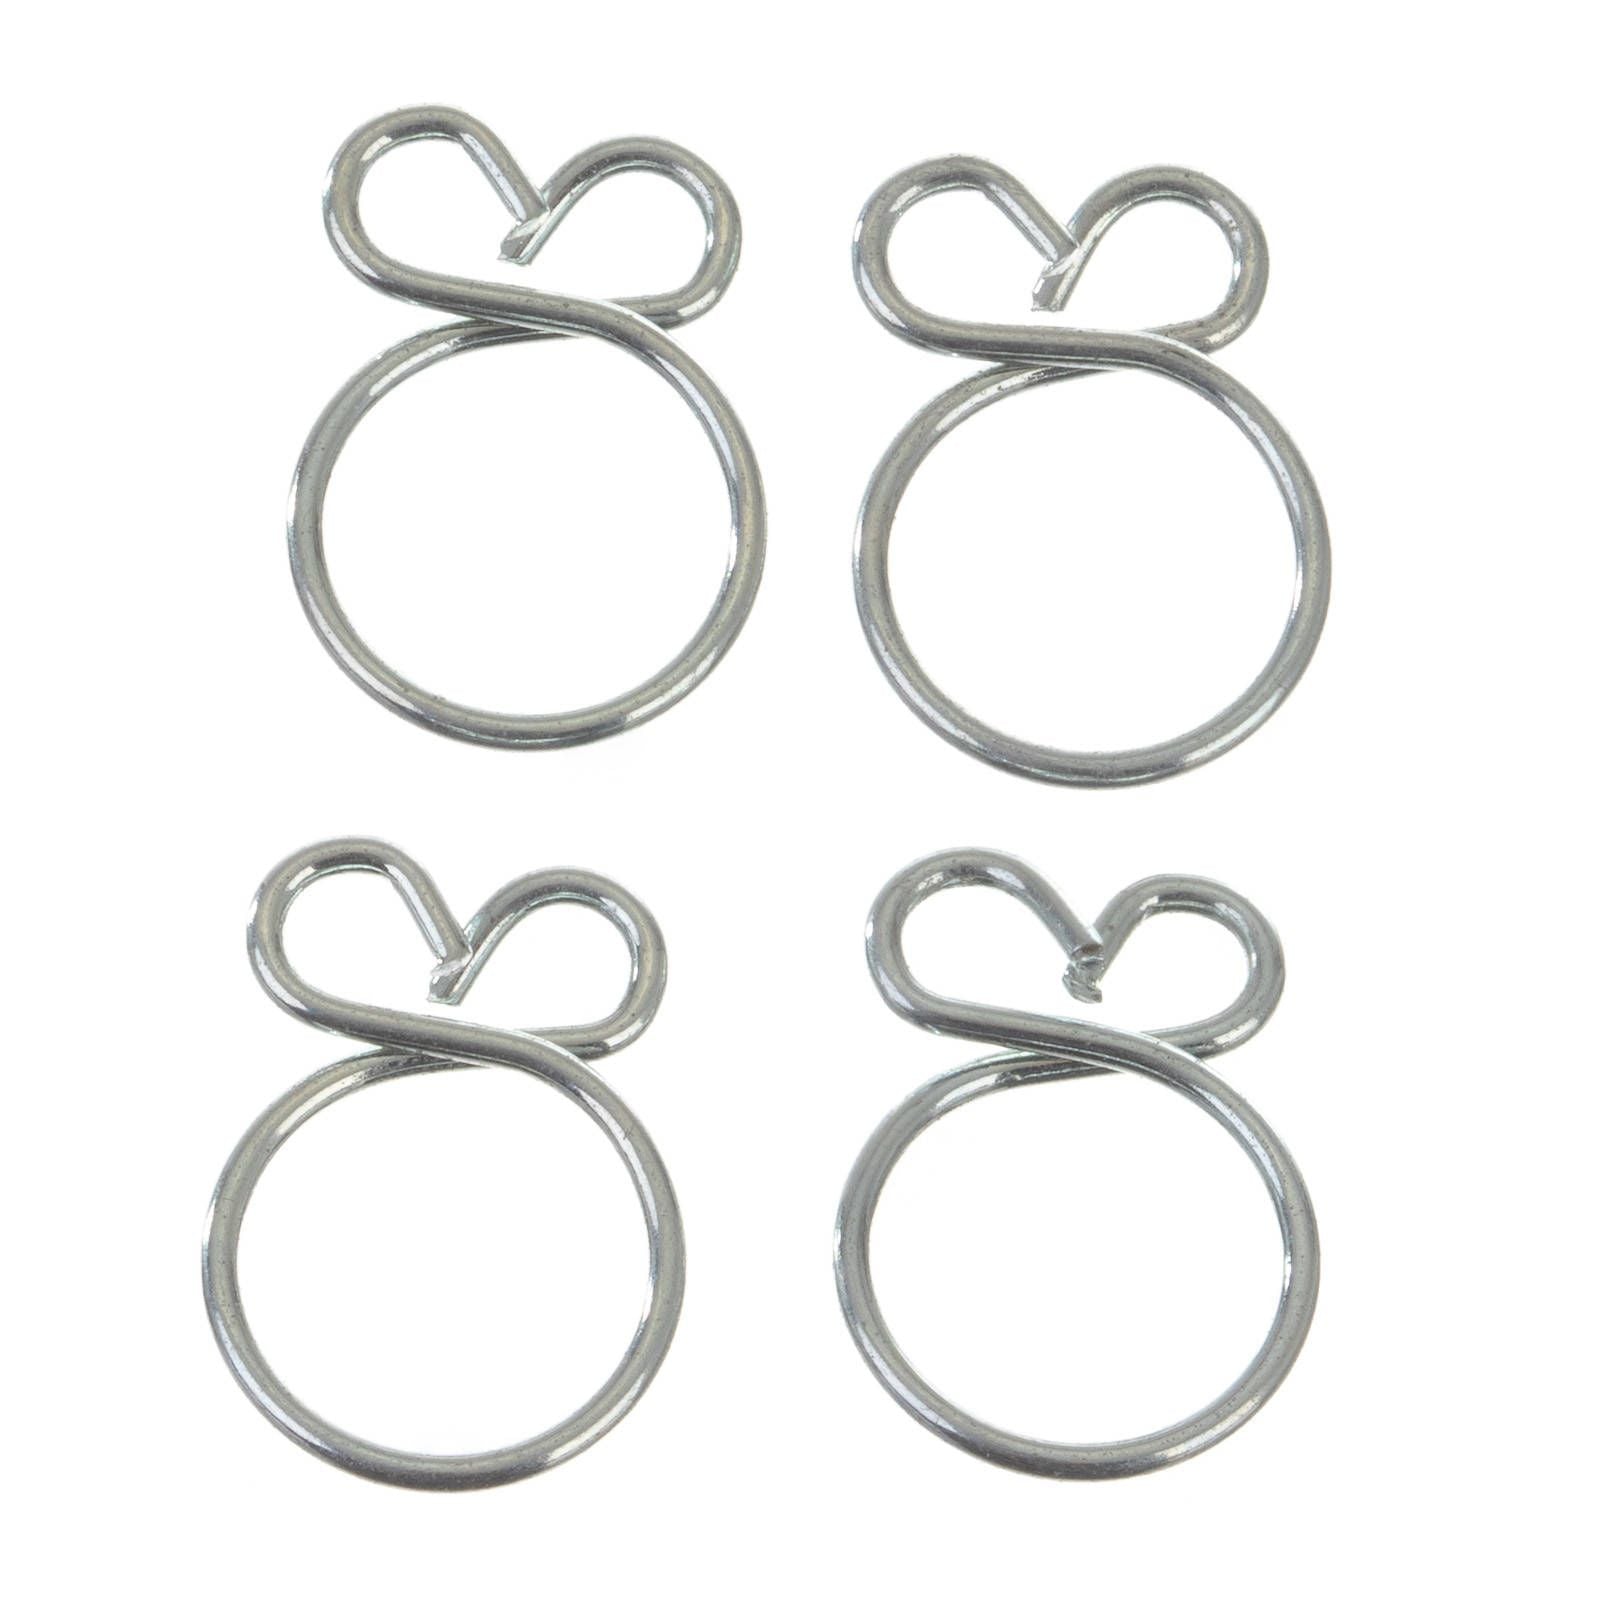 New ALL BALLS Racing Fuel Hose Clamp Kit - 9.7mm Wire (4 Pack) #ABFS00041